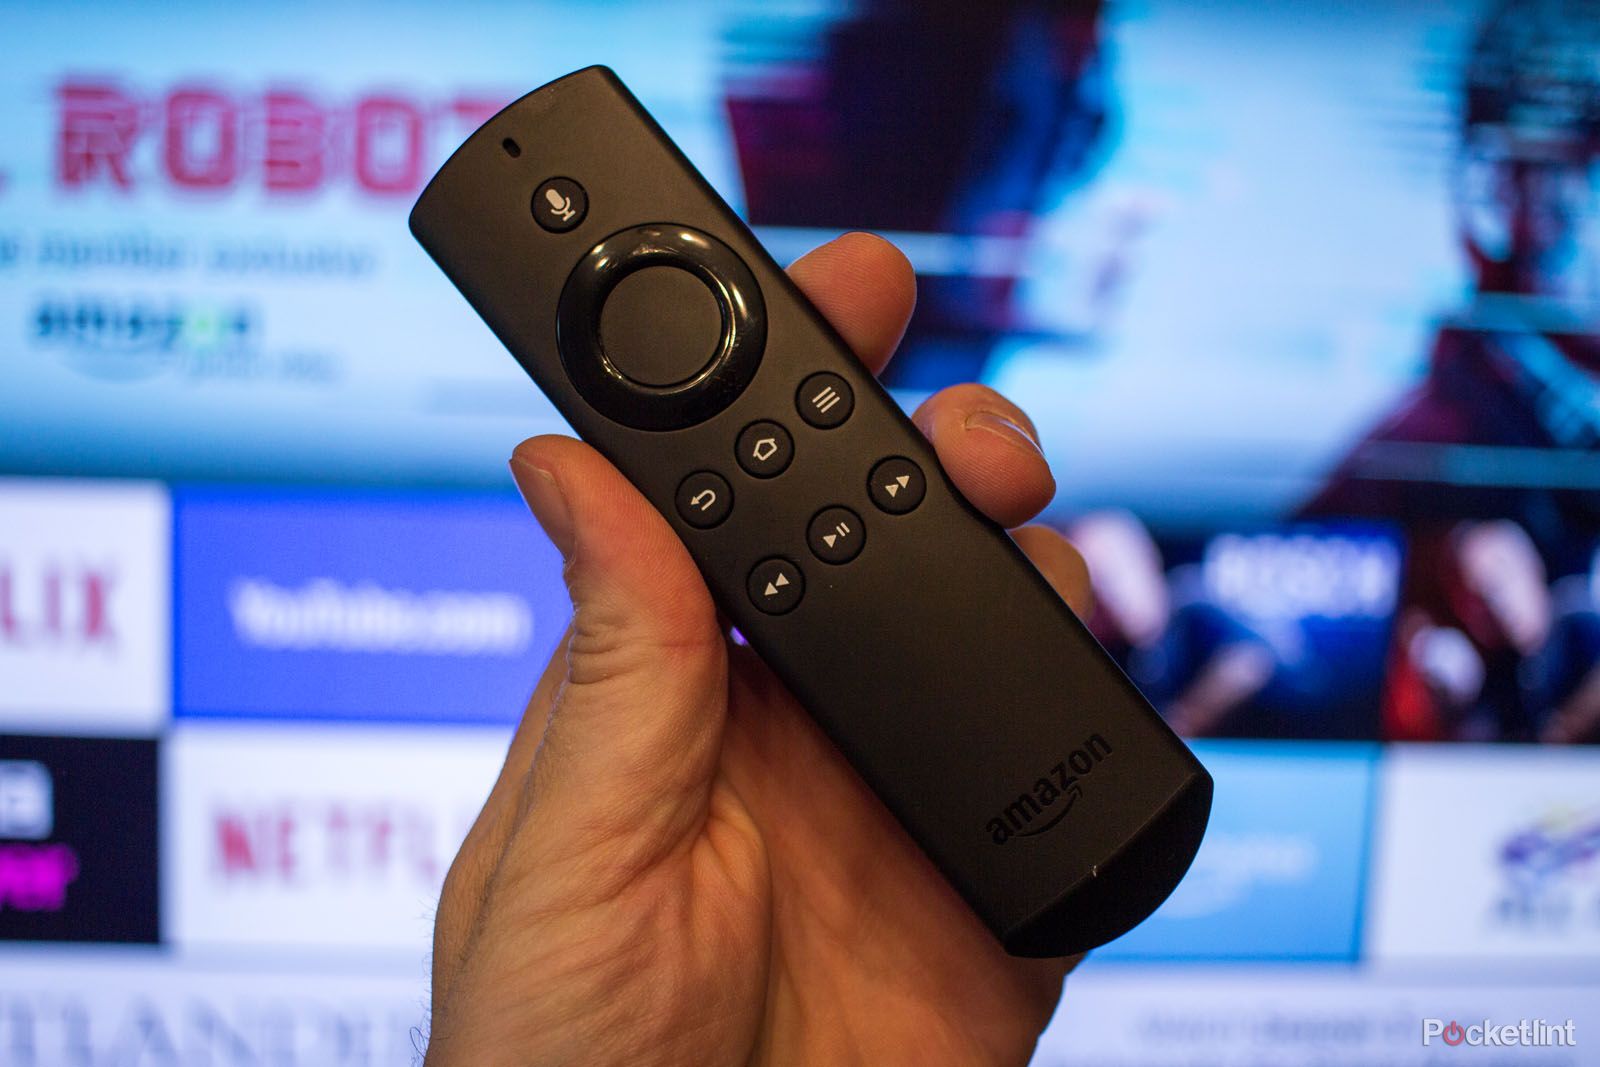 Amazon is making another TV device, but this records live TV